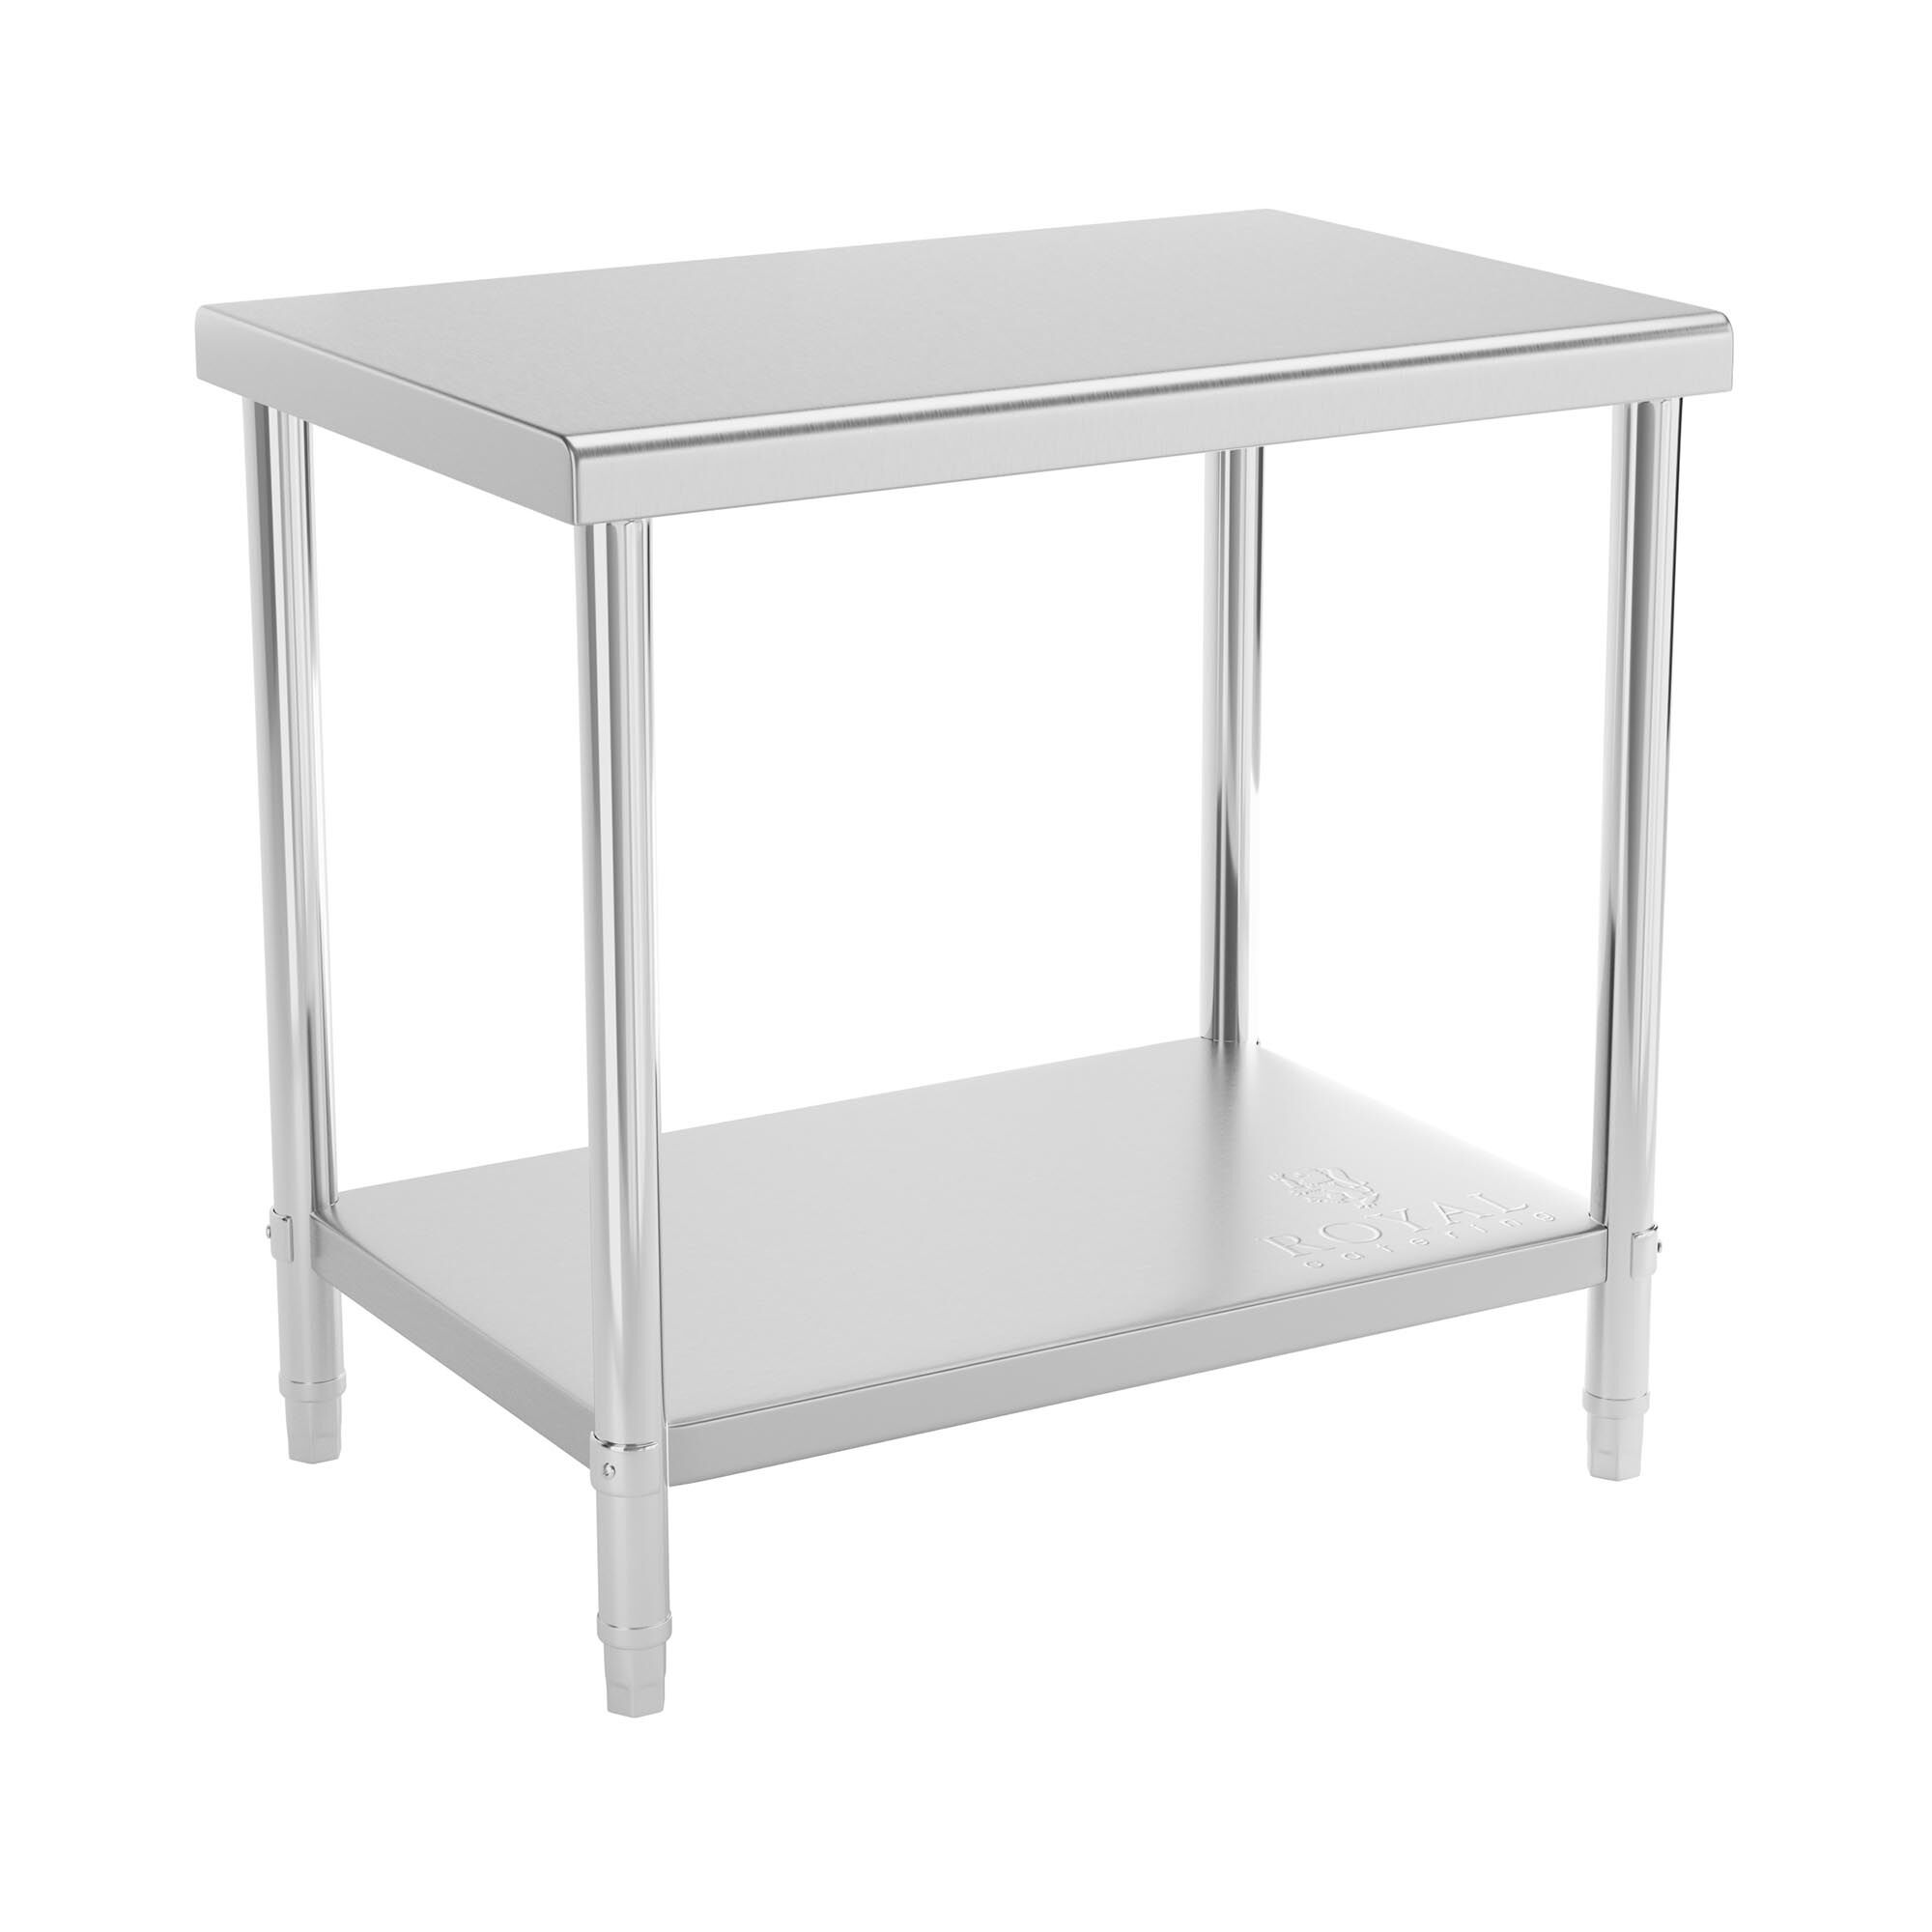 Royal Catering Stainless Steel Work Table - 90 x 60 cm - 210 kg load capacity